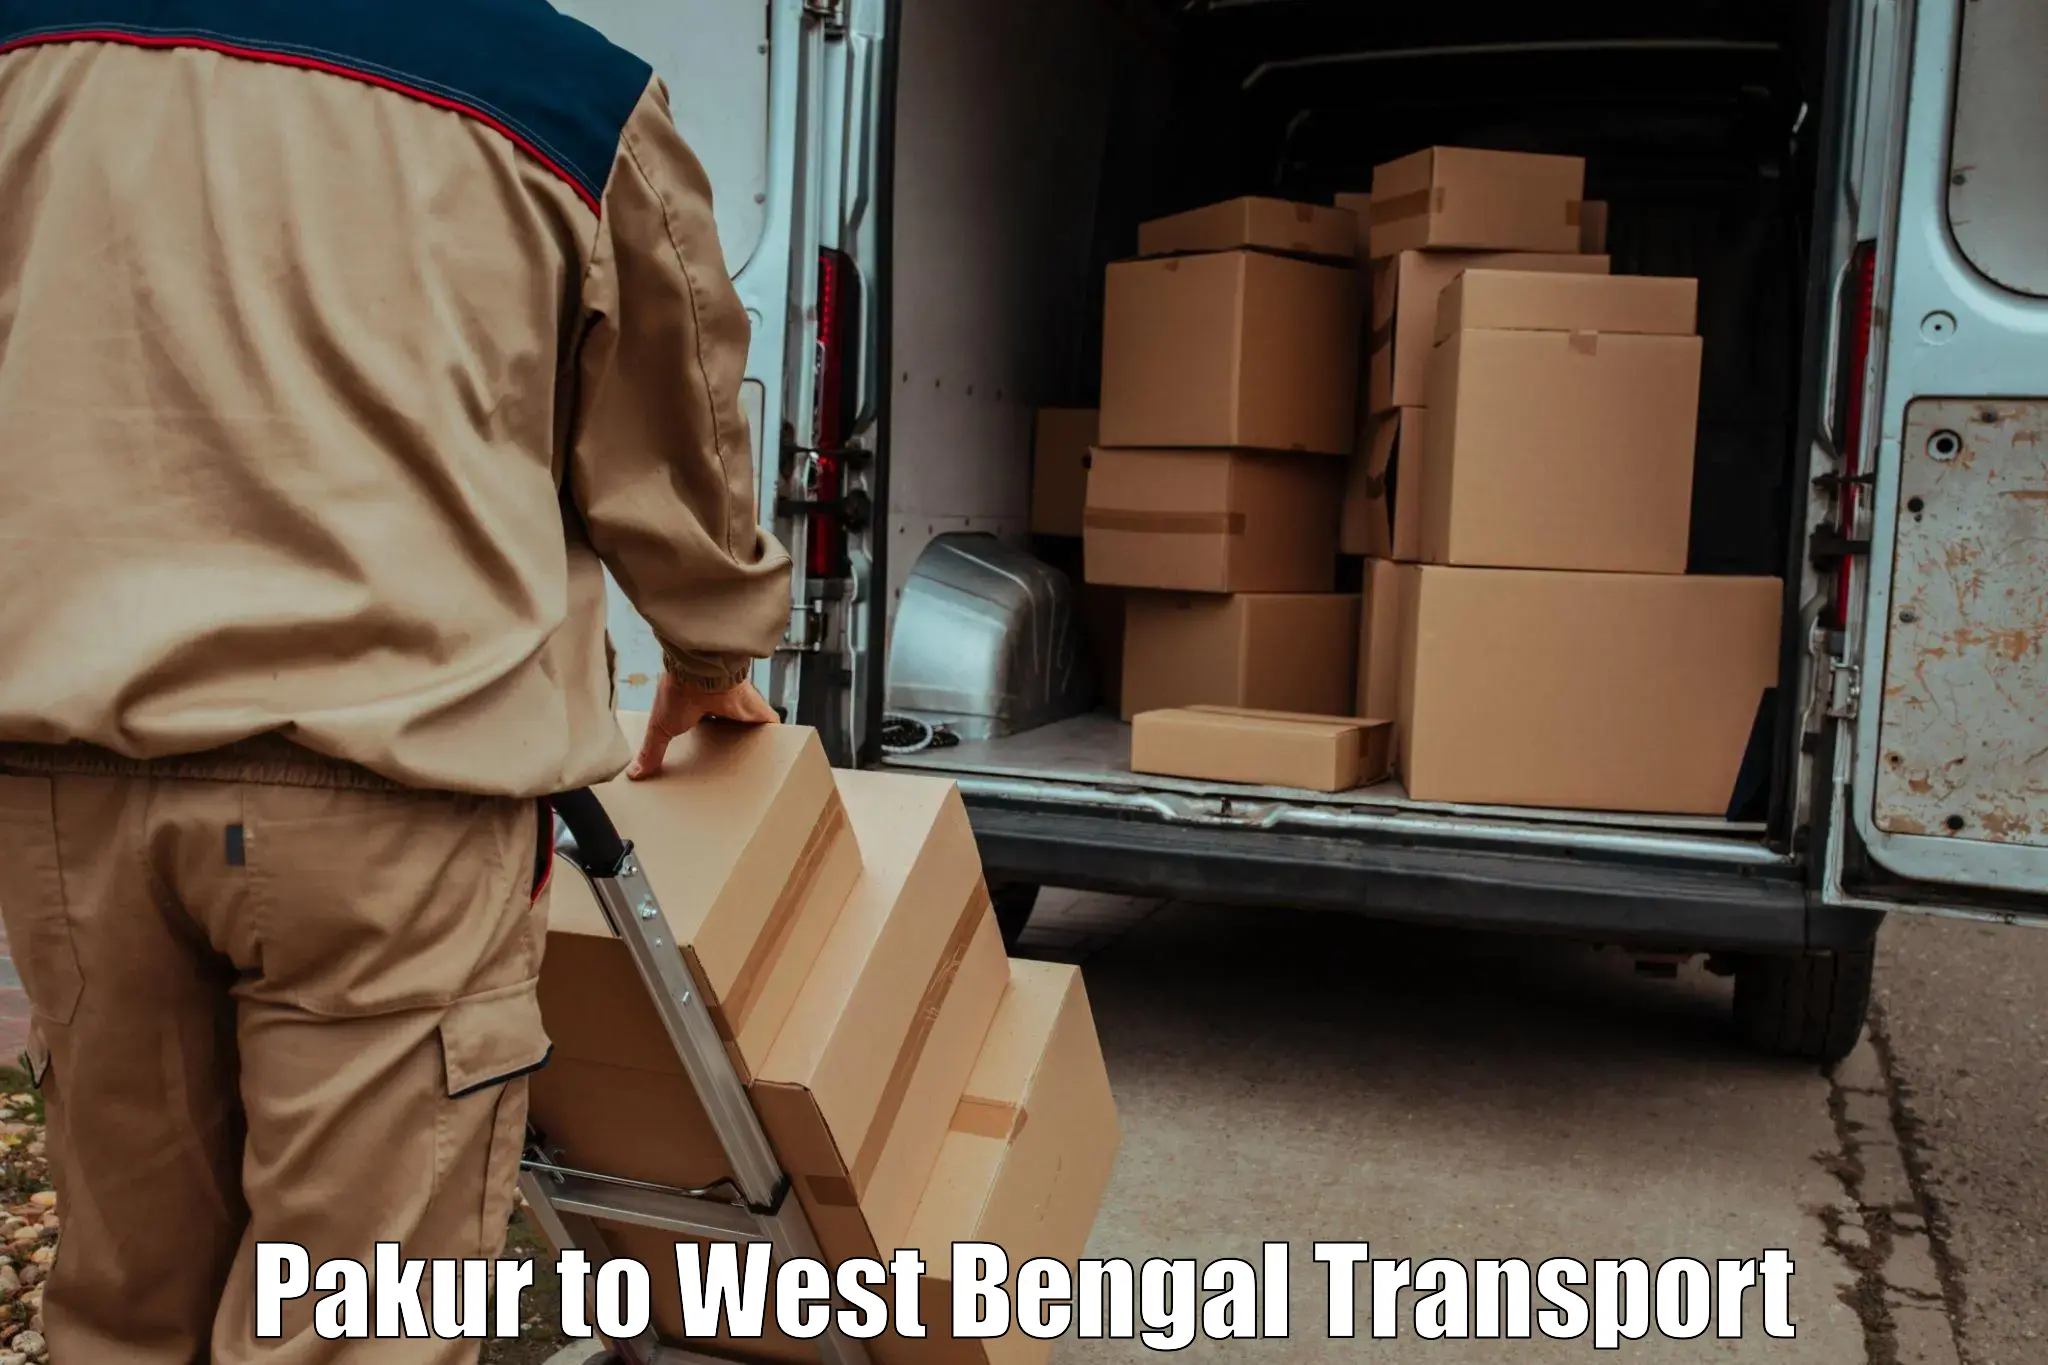 Daily transport service Pakur to Durgapur